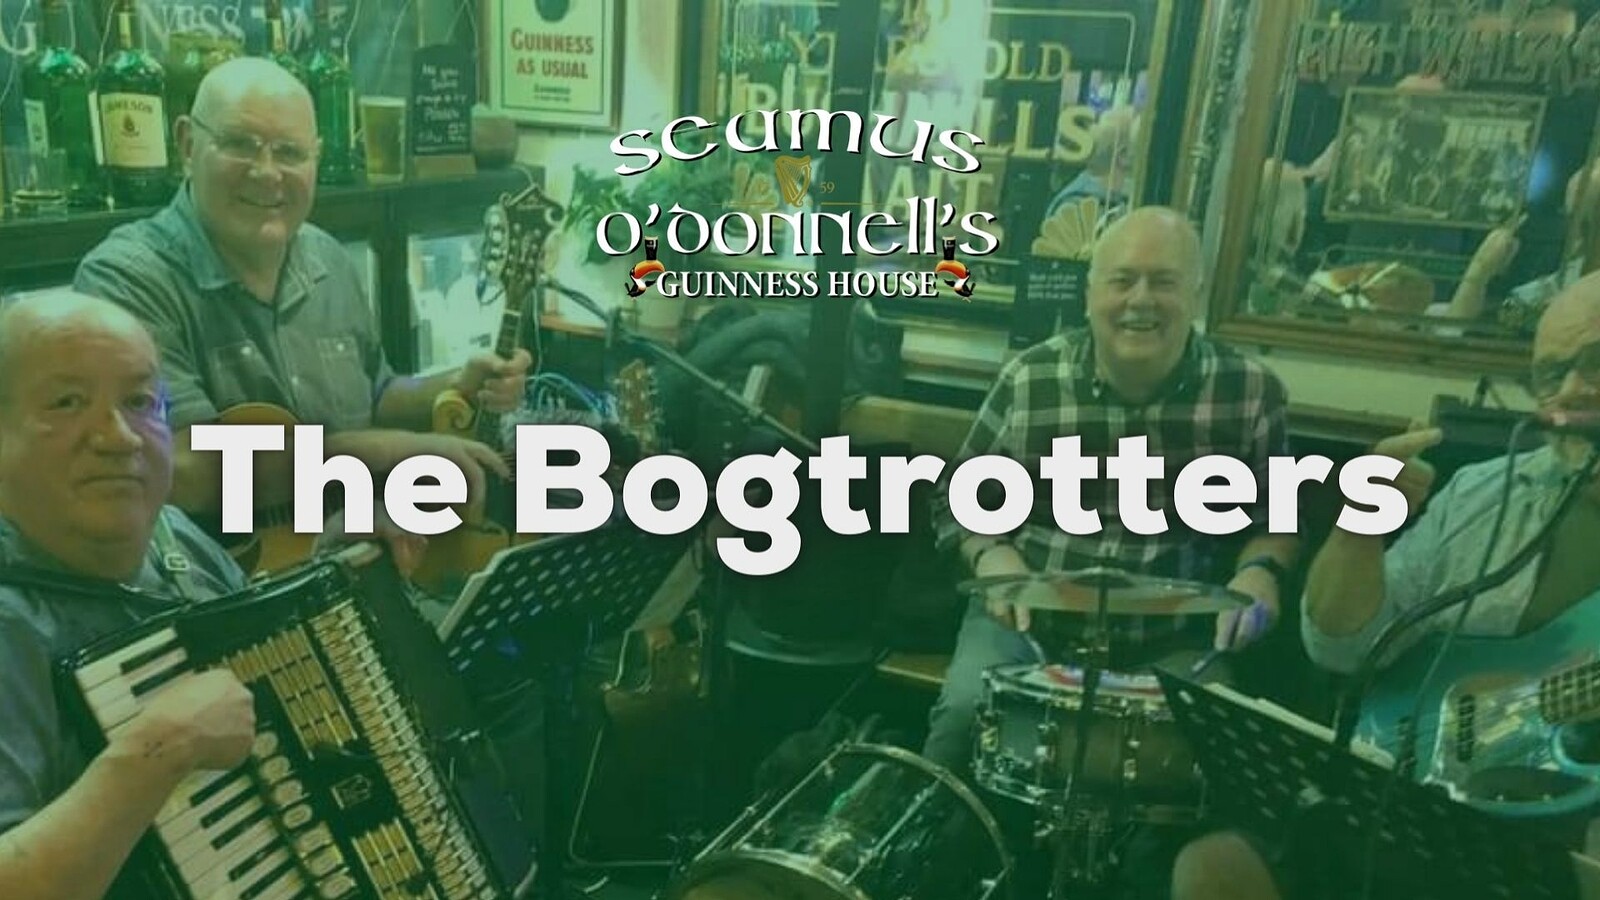 The Bogtrotters at Seamus O'Donnell's